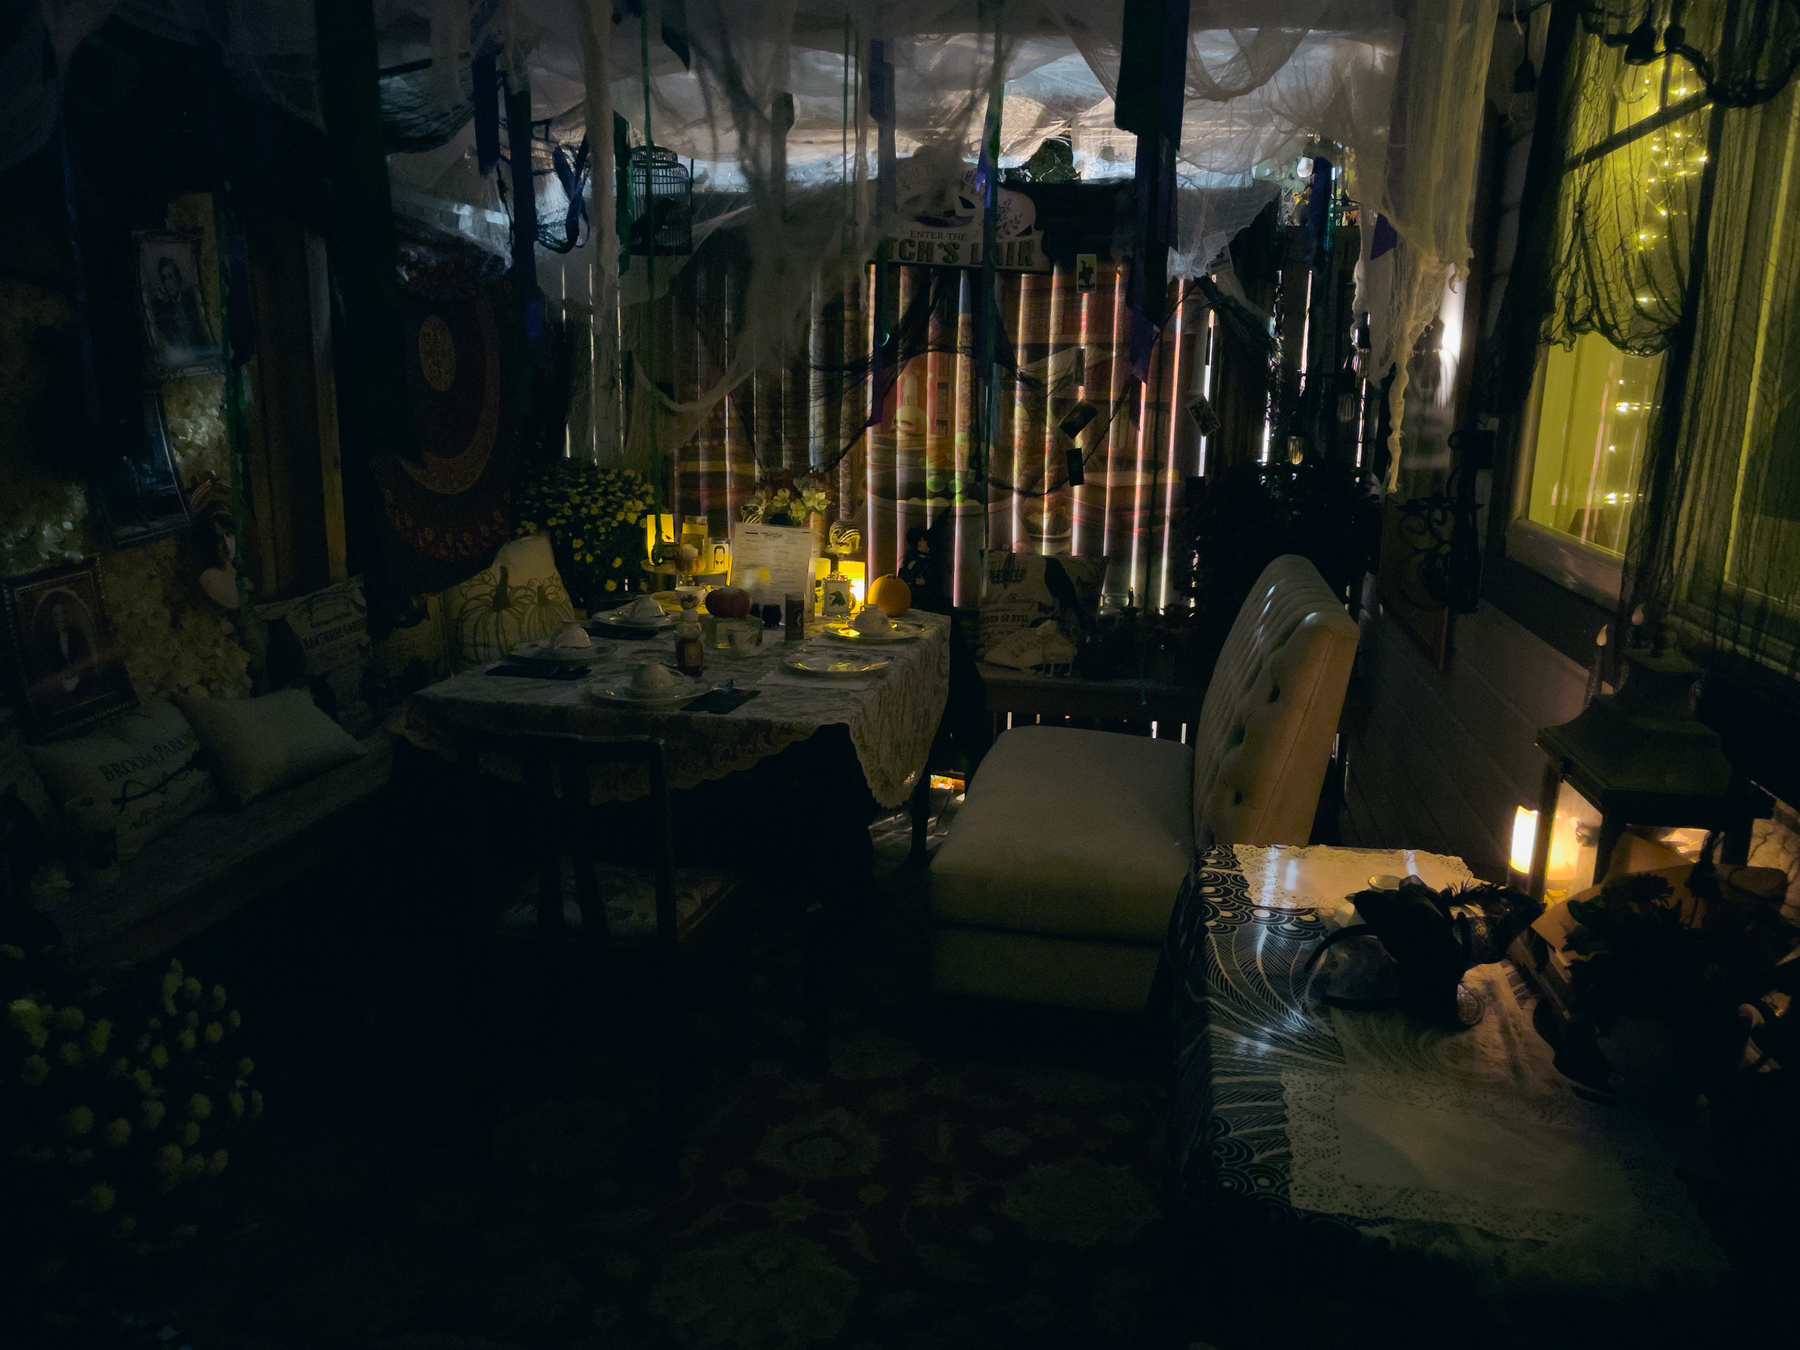 Dining table and chairs under an arbor at night illuminated by various light sources.